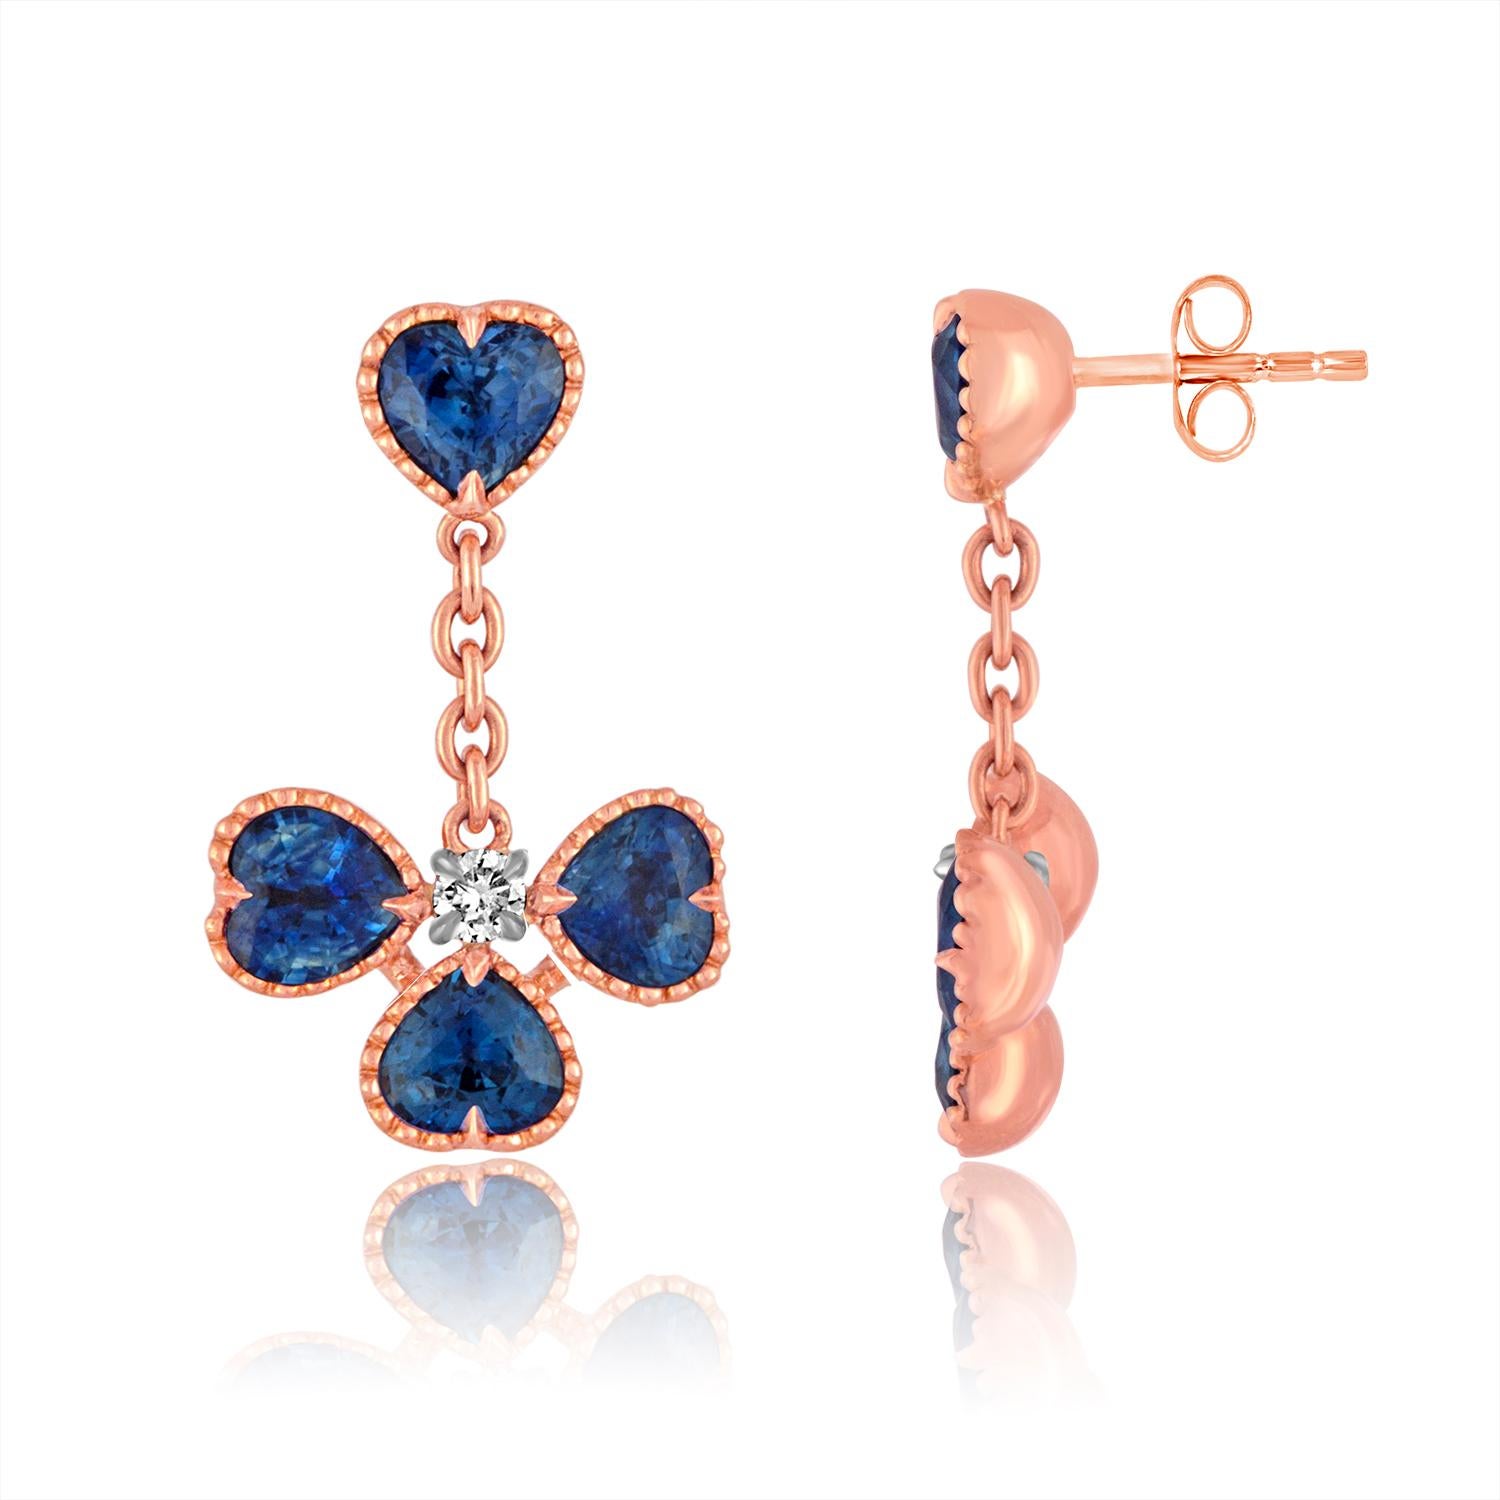 Contemporary 4.53 Carats Heart Shaped Sapphire Diamond Gold Dangle Earrings For Sale